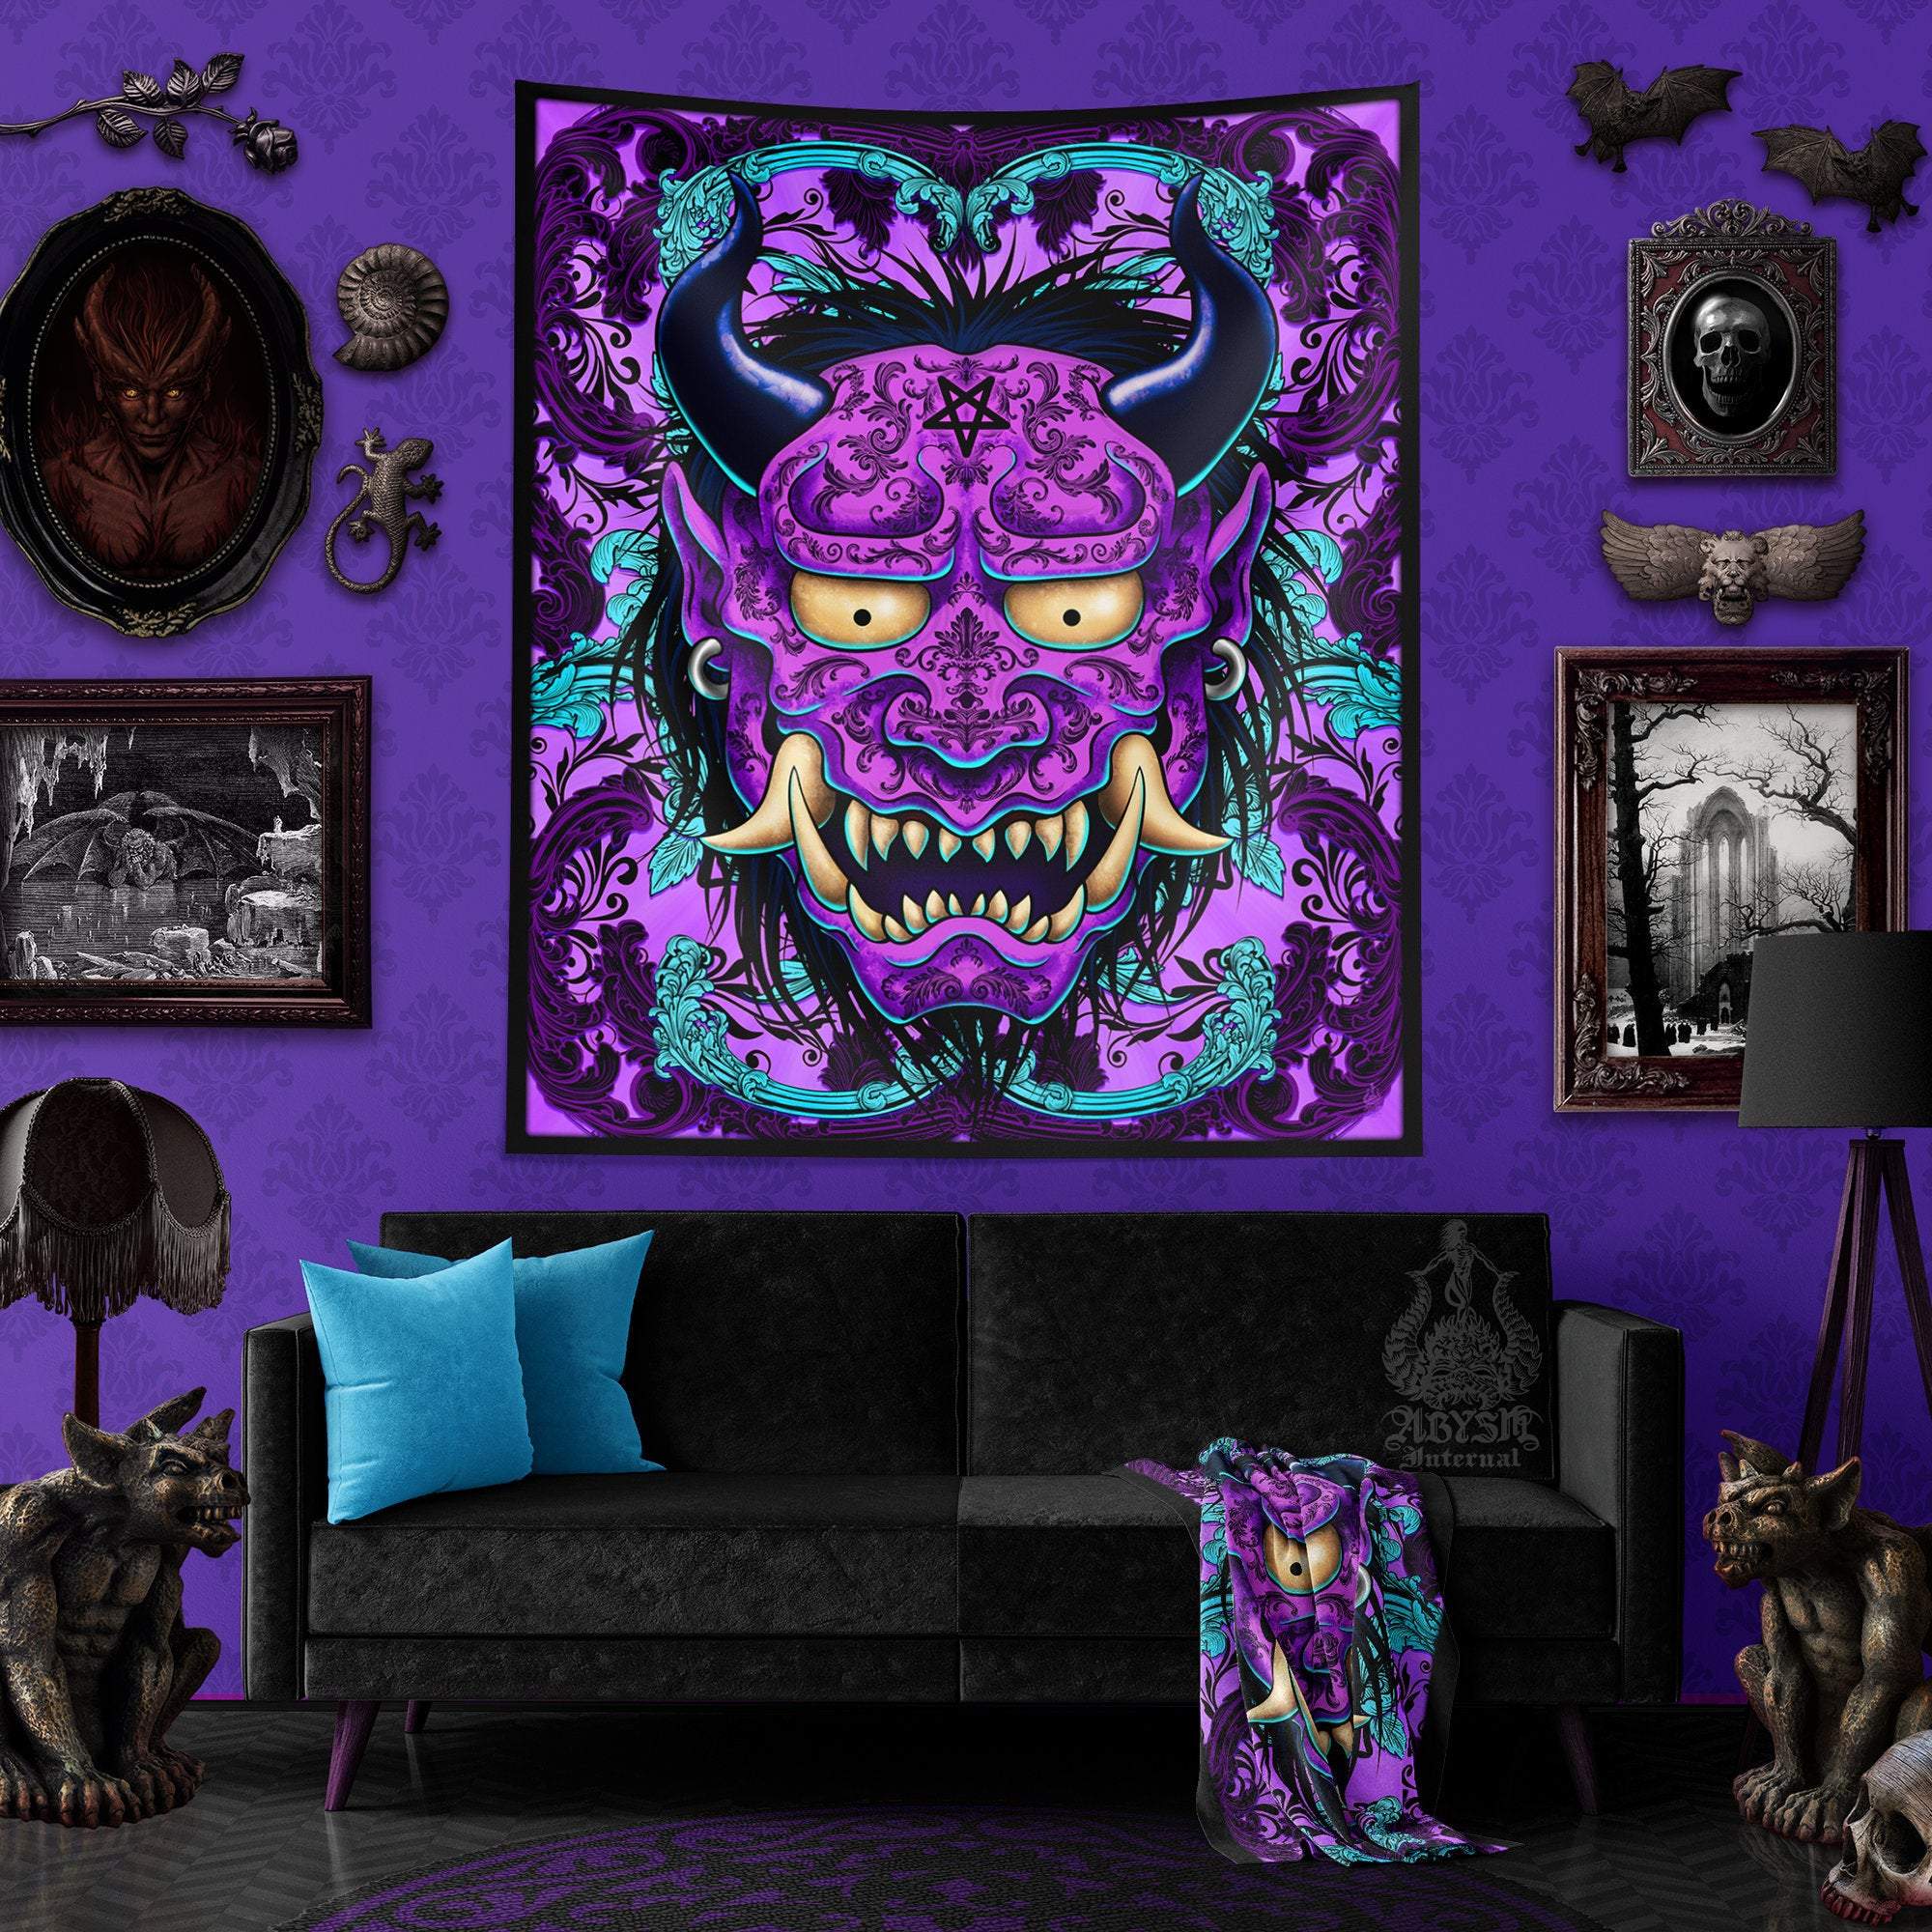 Pastel Goth Tapestry, Oni Wall Hanging, Japanese Demon, Anime and Gamer Home Home Decor, Art Print - Black & Purple - Abysm Internal